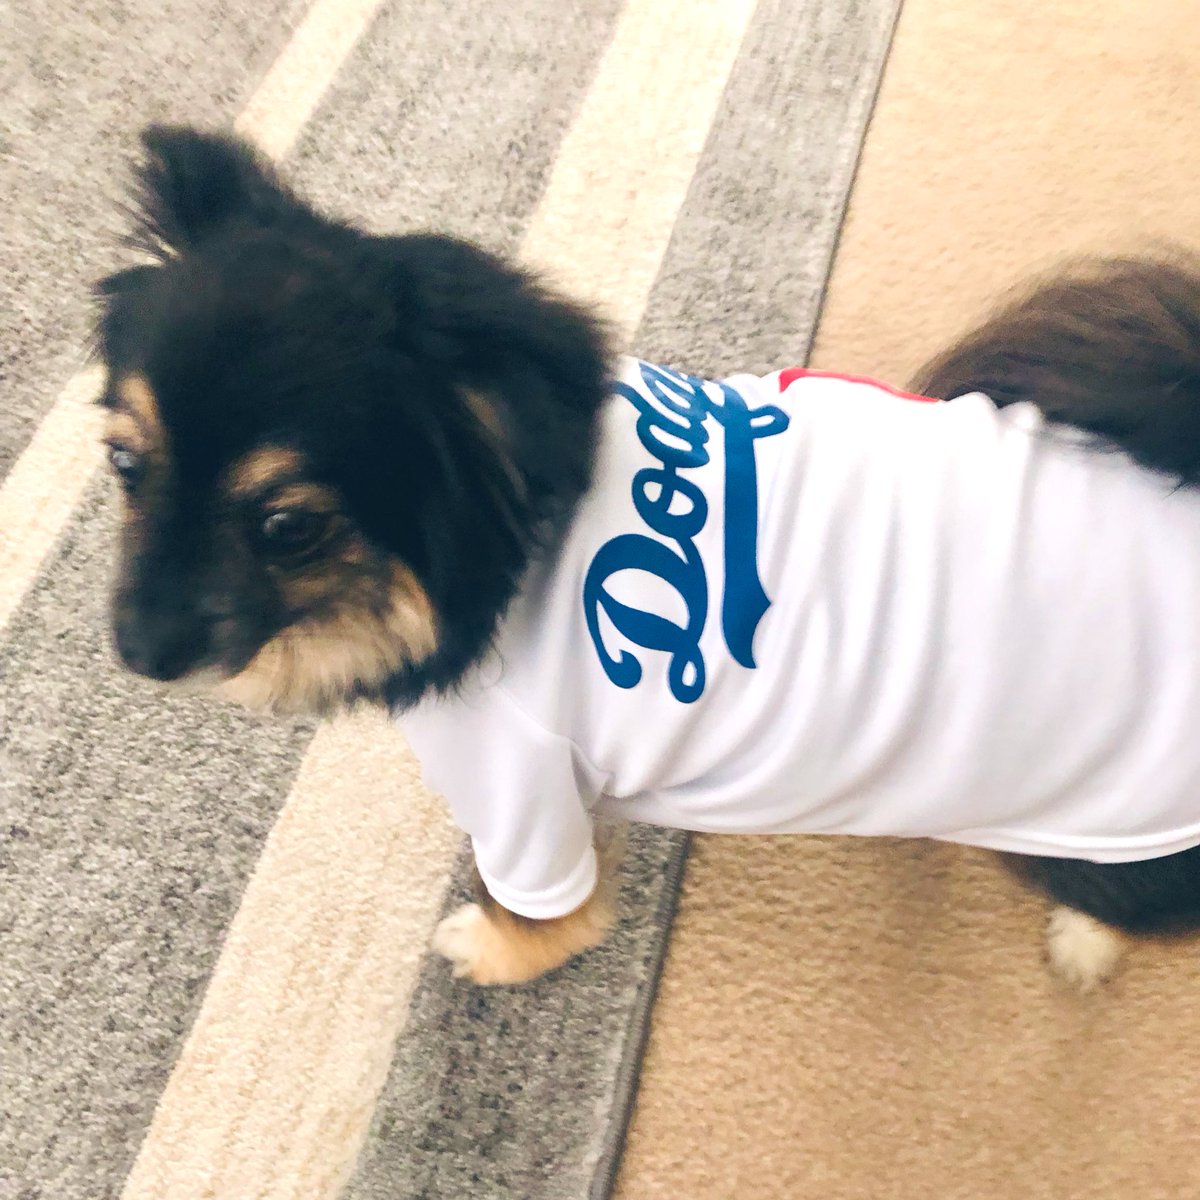 Let’s Do This @Dodgers!! Cheers to @SportsNetLA @DodgersNation. Love cats too @goooose15 #Dodgers